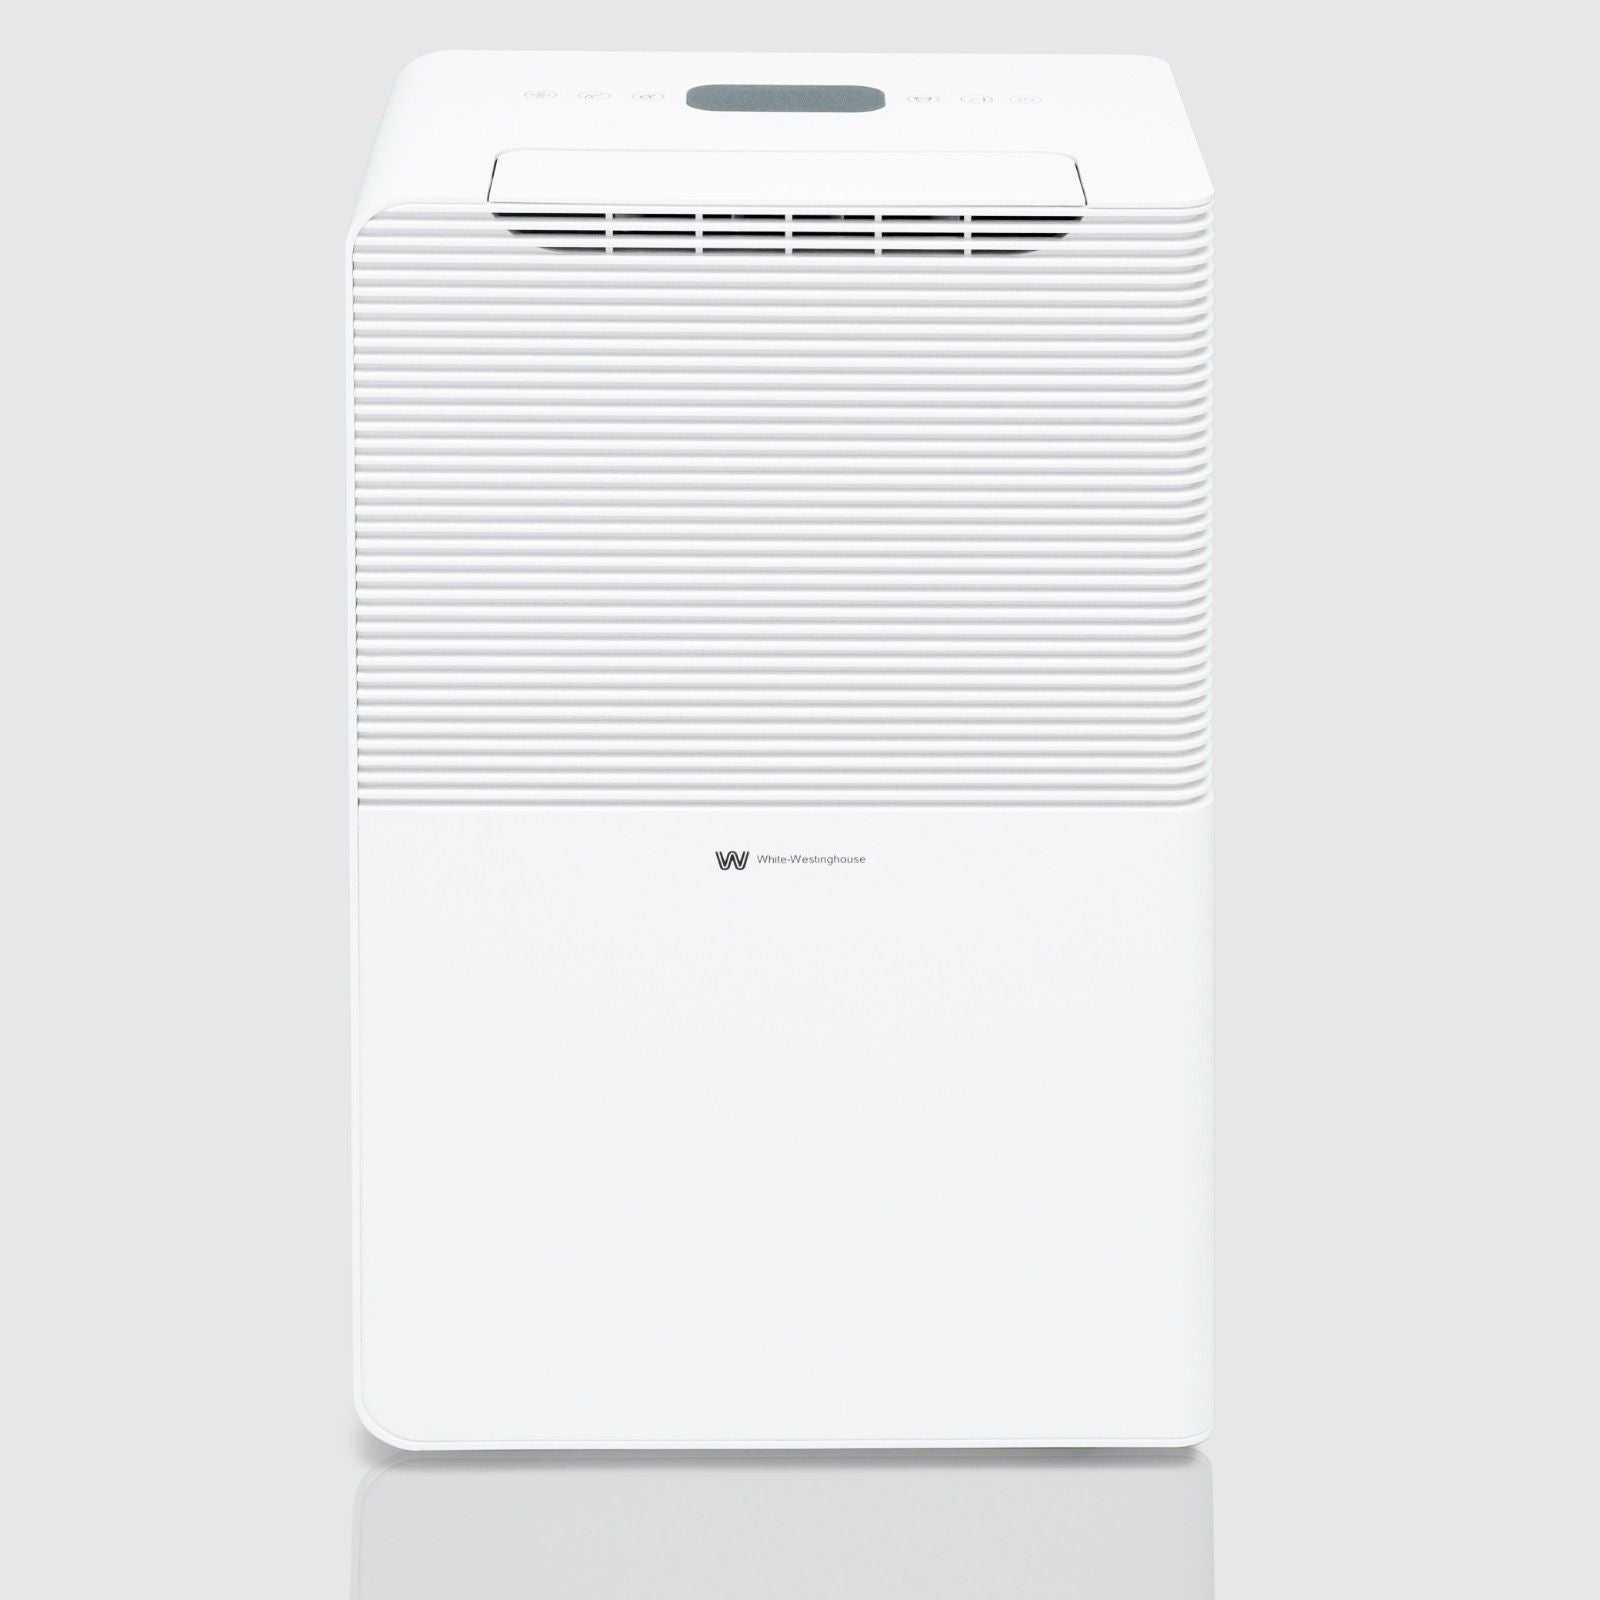 Front view of the White Westinghouse Dehumidifier AWHD40, showcasing the sleek white design with top air vents and a digital control panel. The unit's modern and compact design is ideal for maintaining optimal humidity levels in residential and commercial spaces.